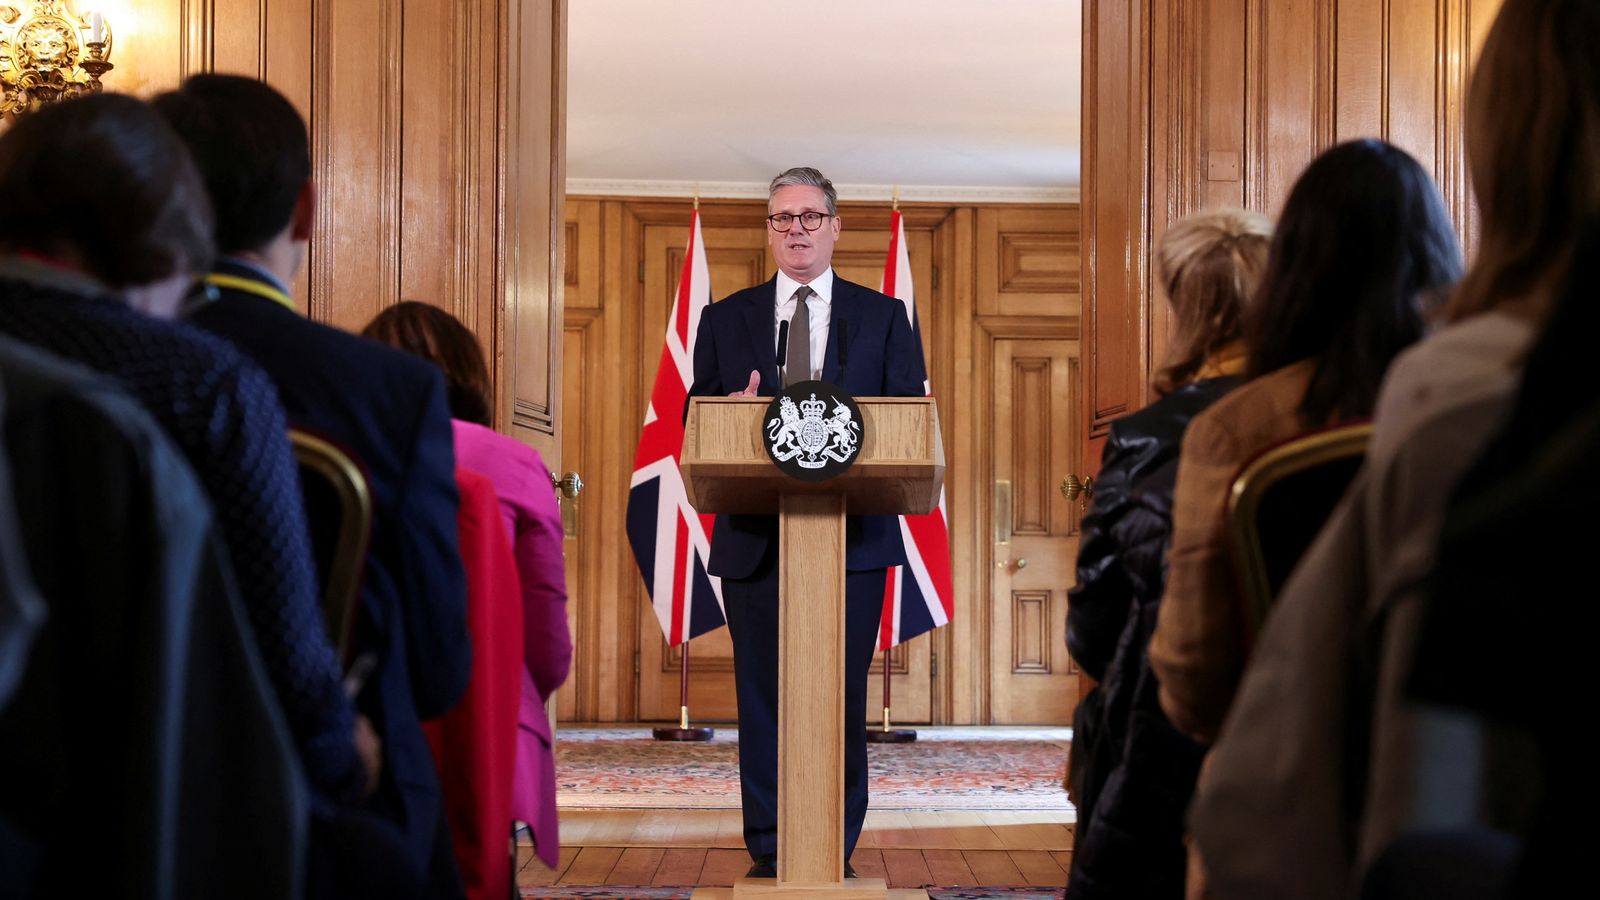 PM to visit all four nations of UK - and announces 'mission delivery boards' to drive change